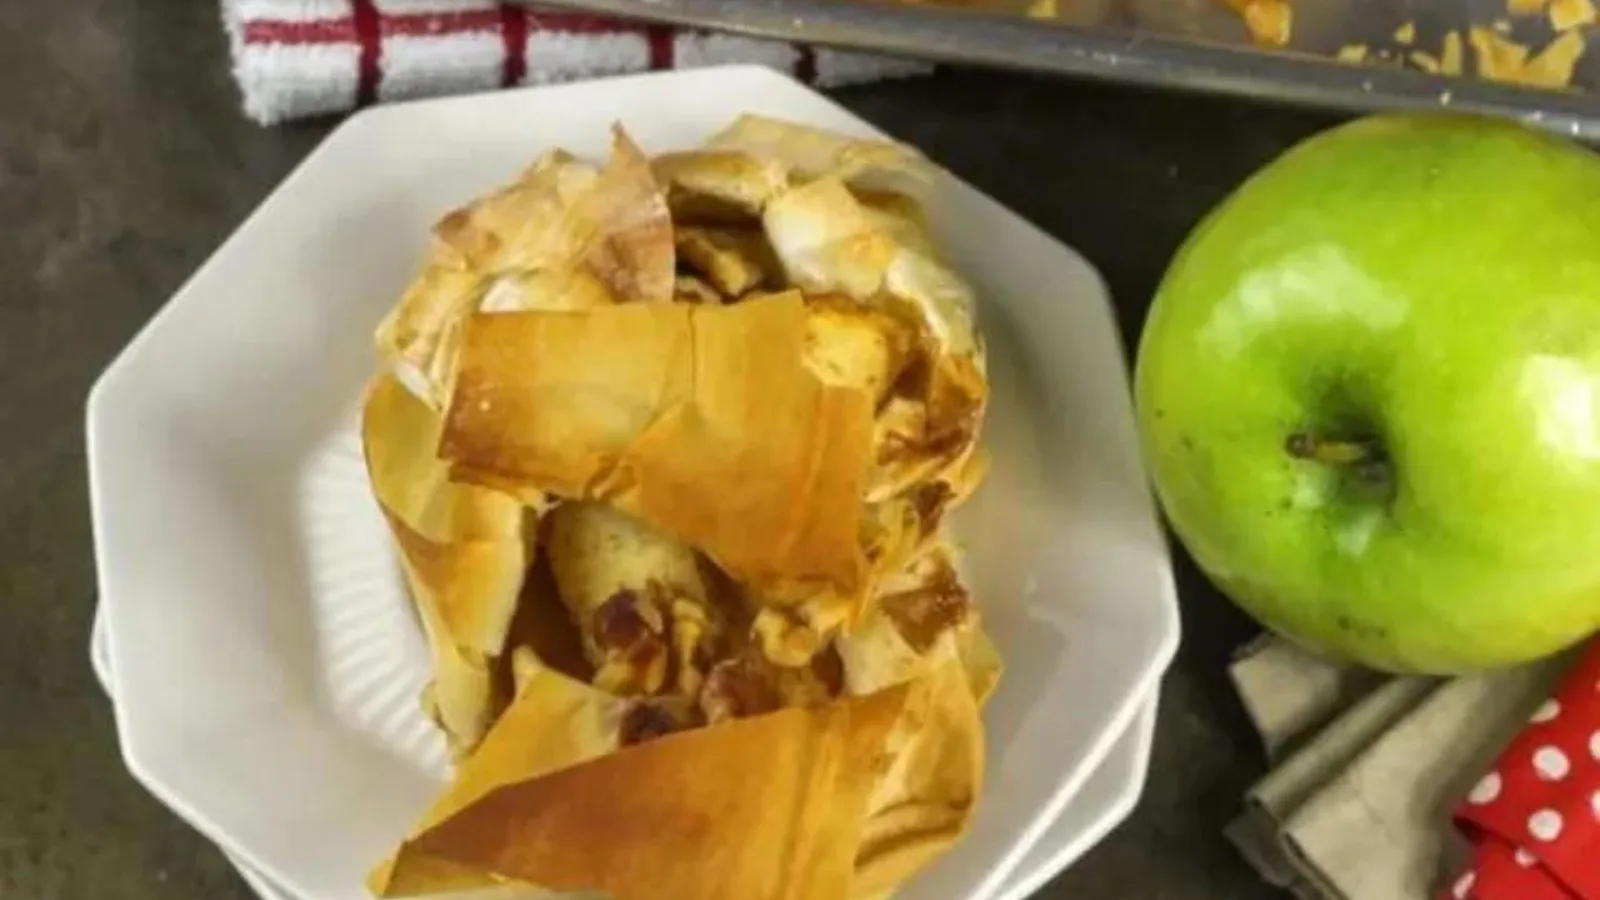 Apple pies with phyllo dough crust.